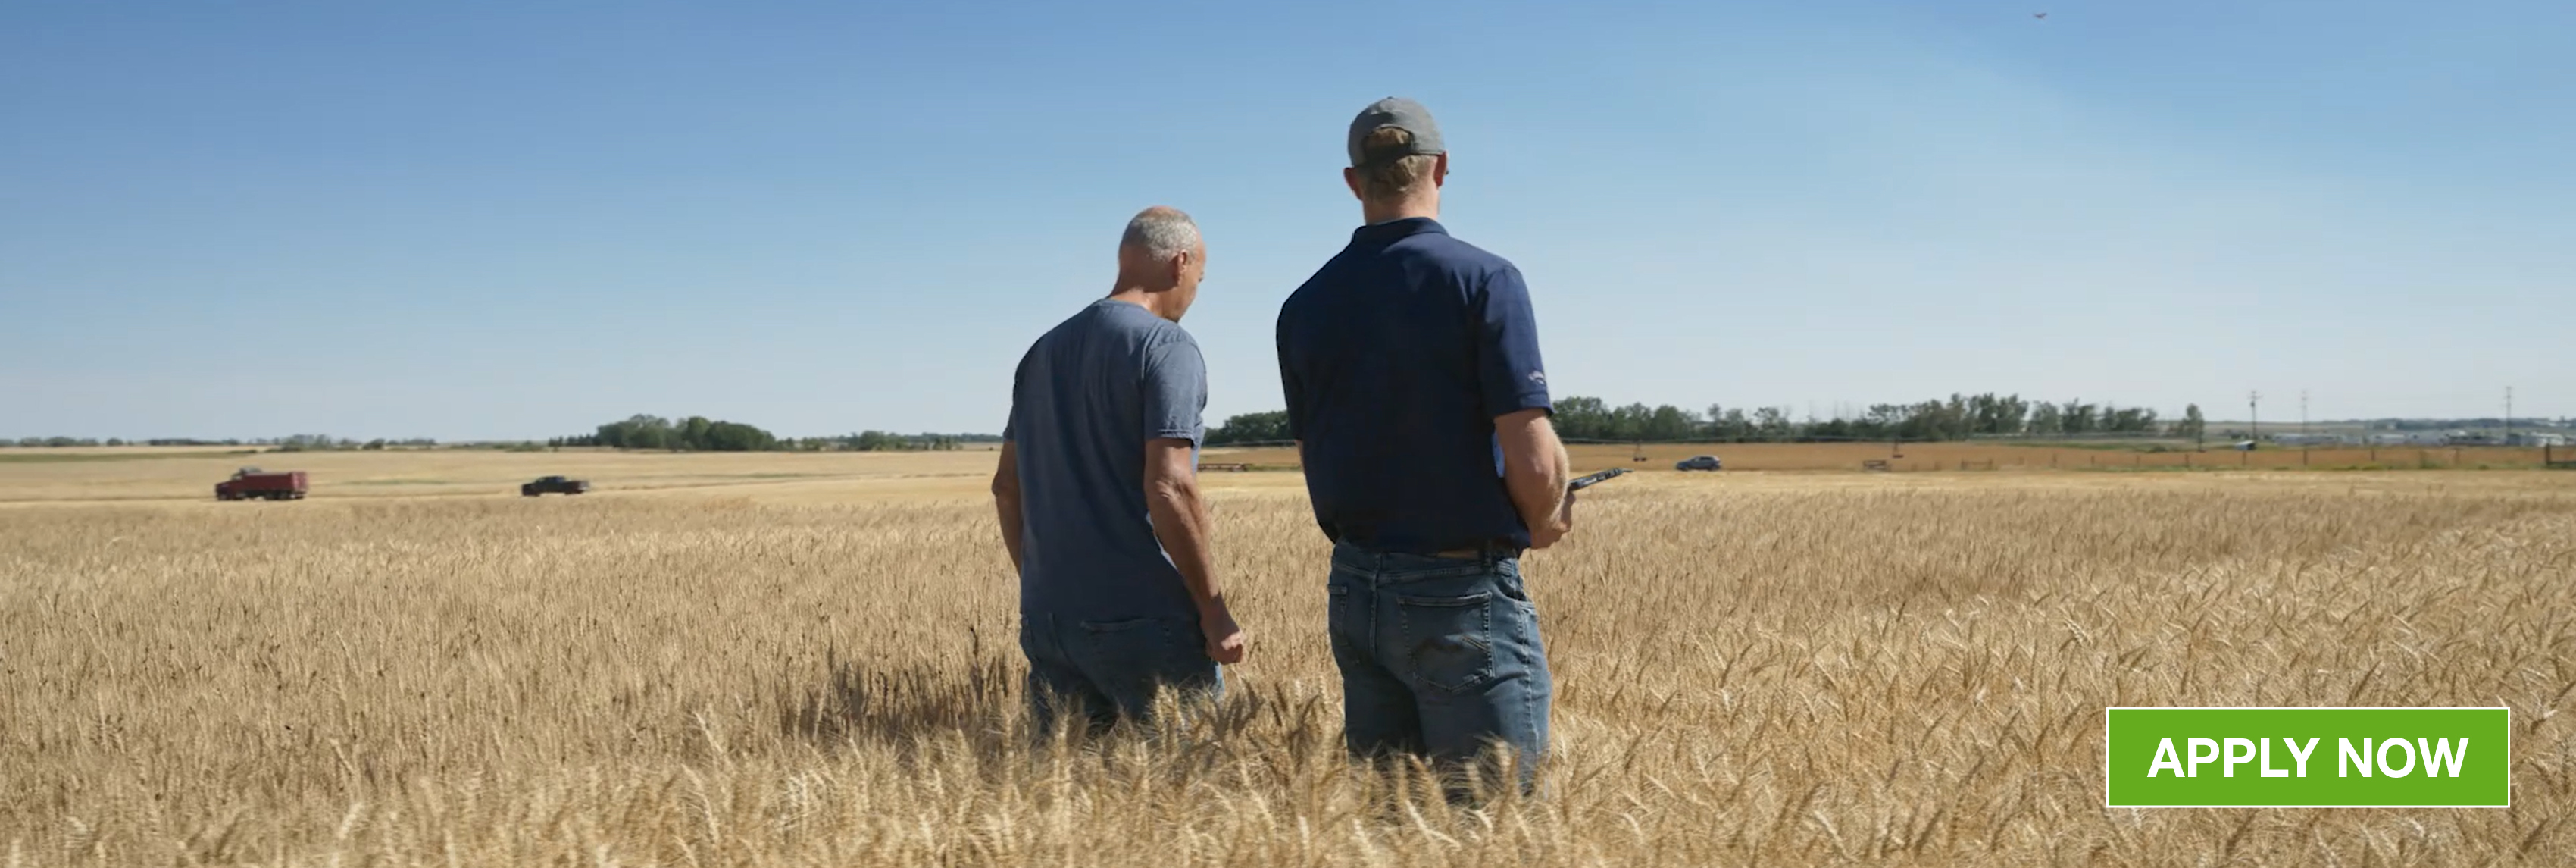 two men in a cereal crop field